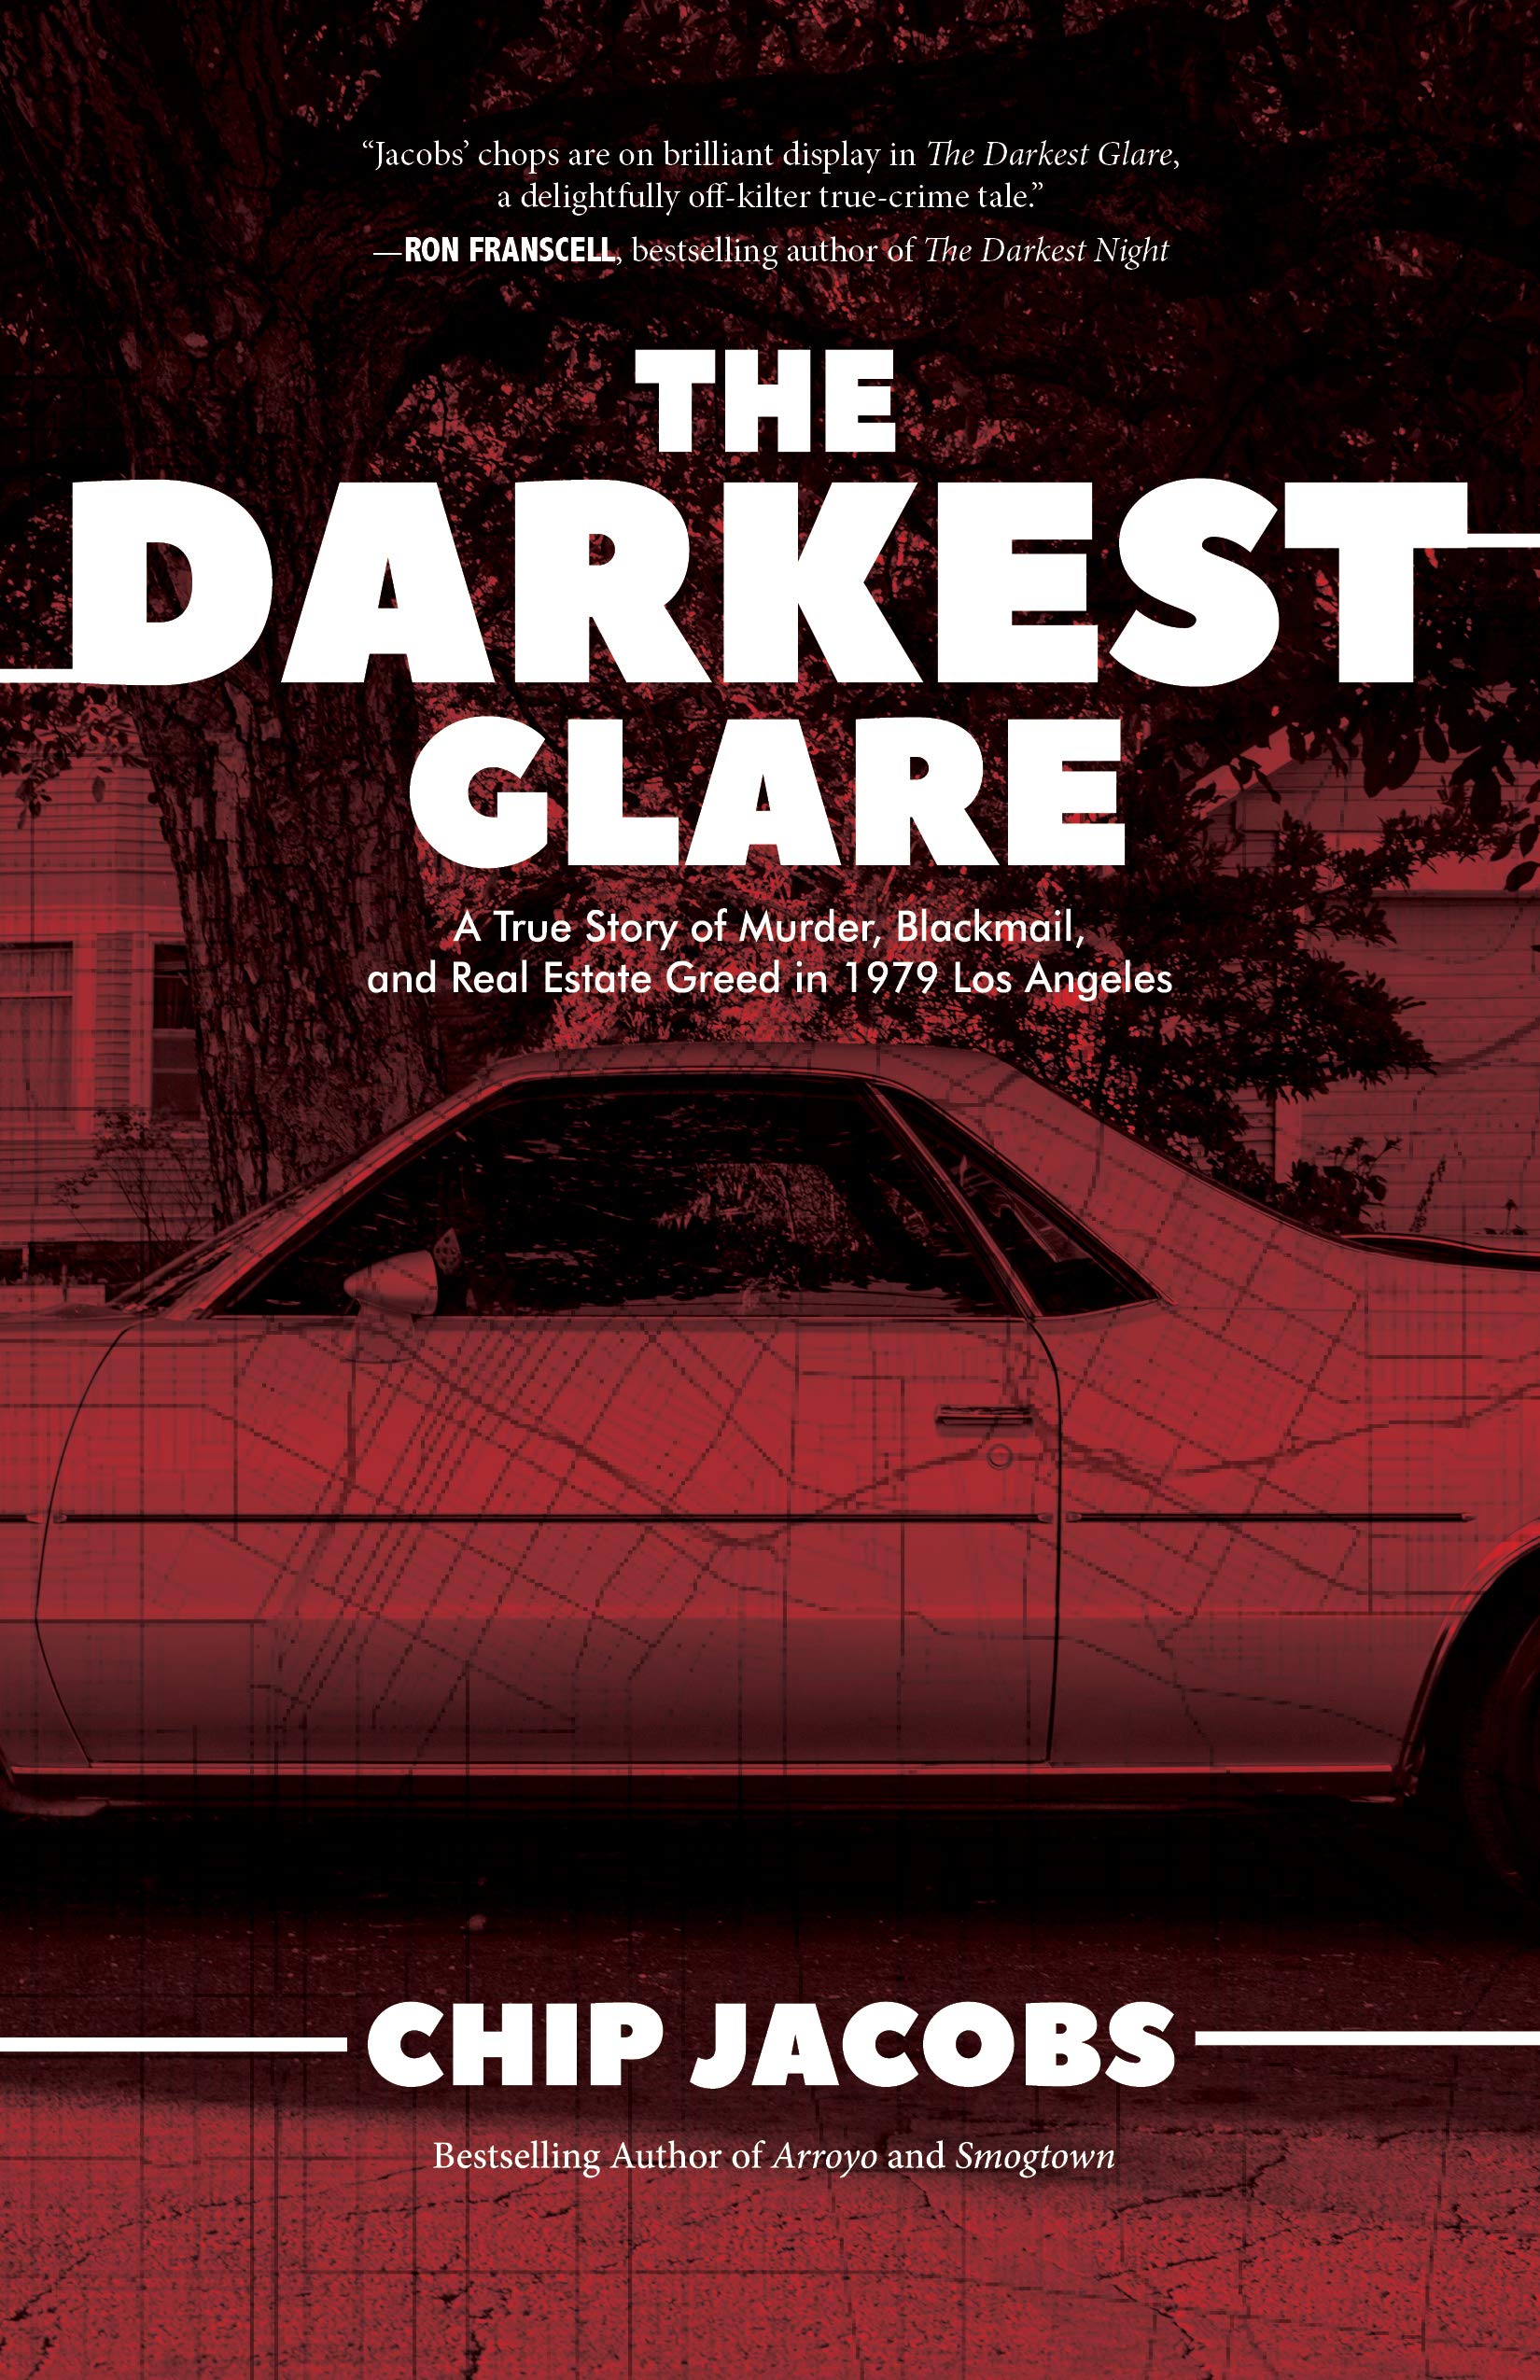 The Darkest Glare - A True Story of Murder, Blackmail, and Real Estate Greed in 1979 Los Angeles